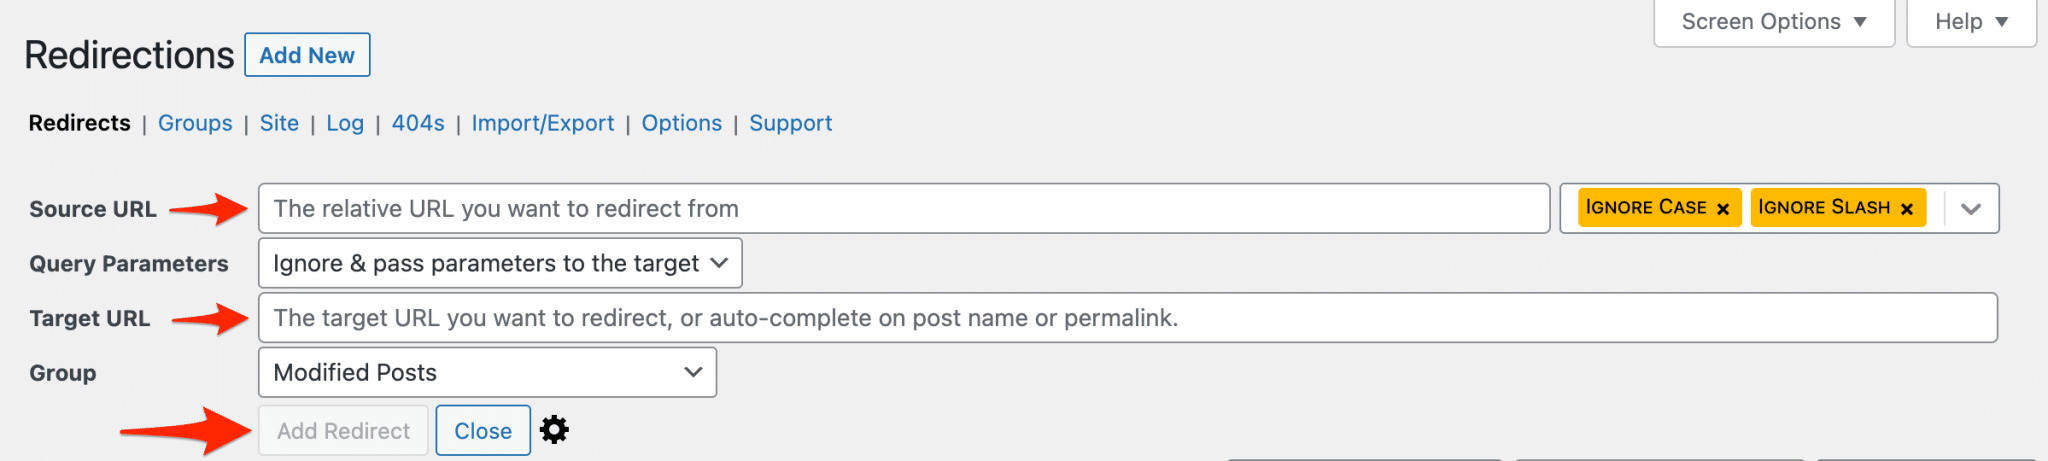 Settings of the Redirection plugin on WordPress to set up a new redirect.